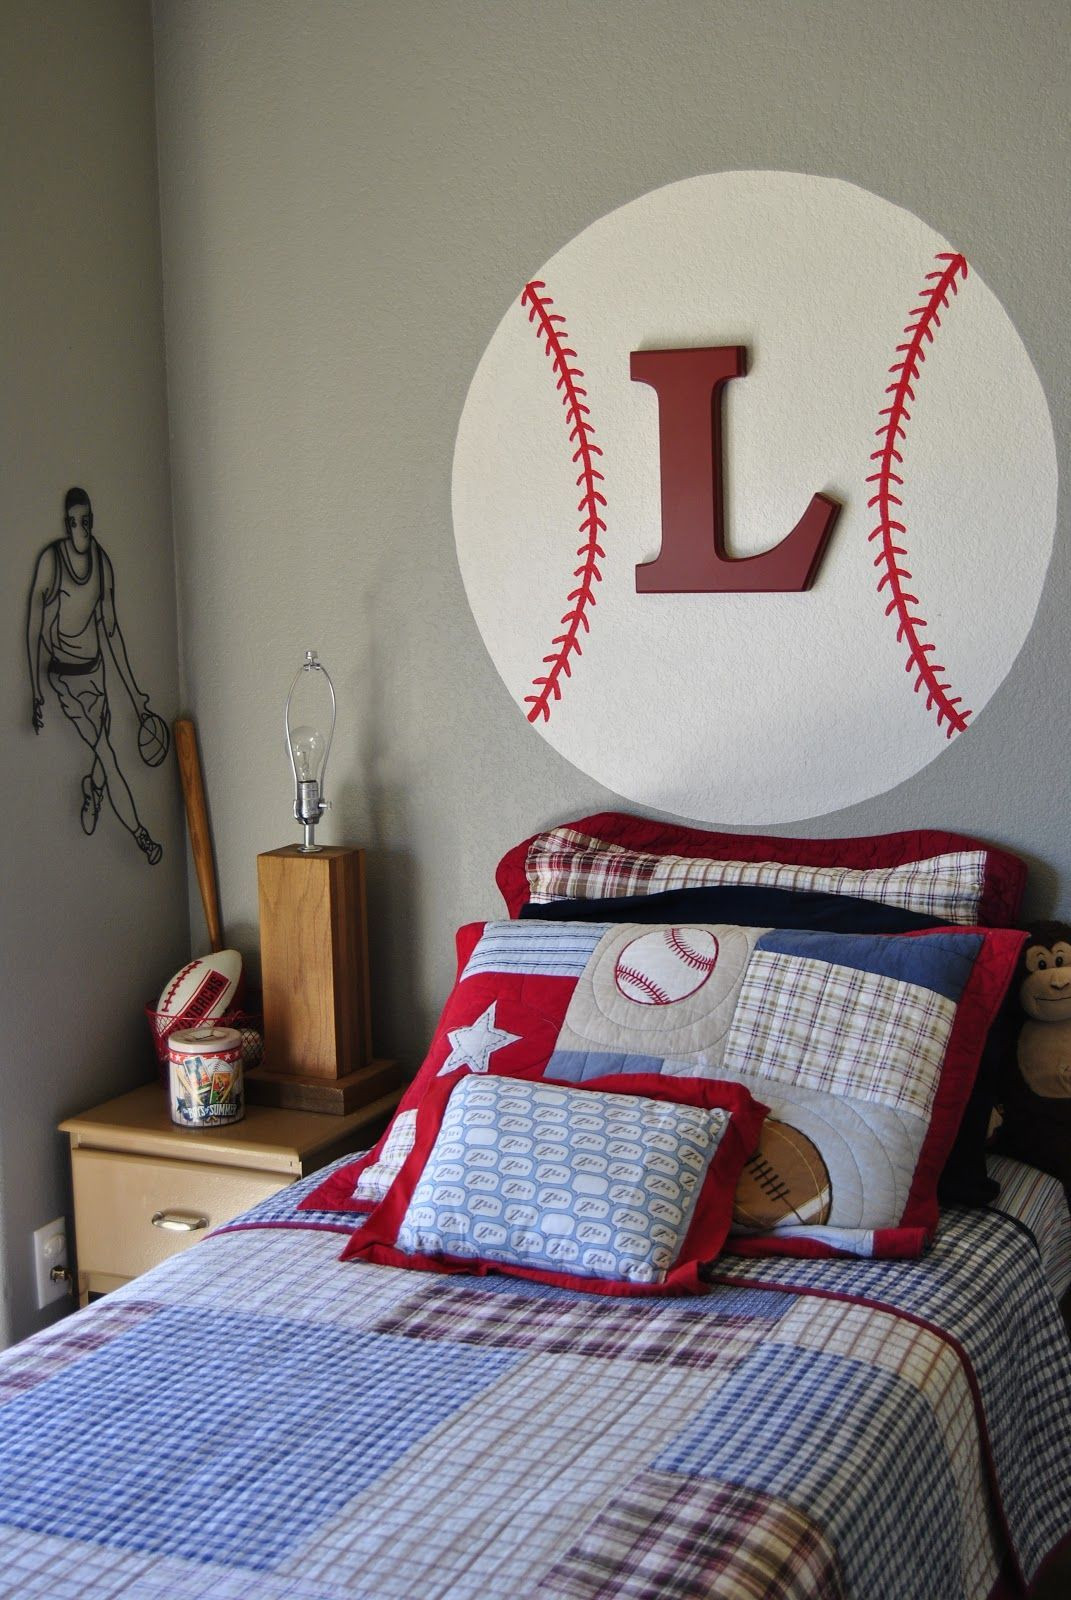 Kids Sports Room Decorations
 45 Best Boys Bedrooms Designs Ideas and Decor Inspiration